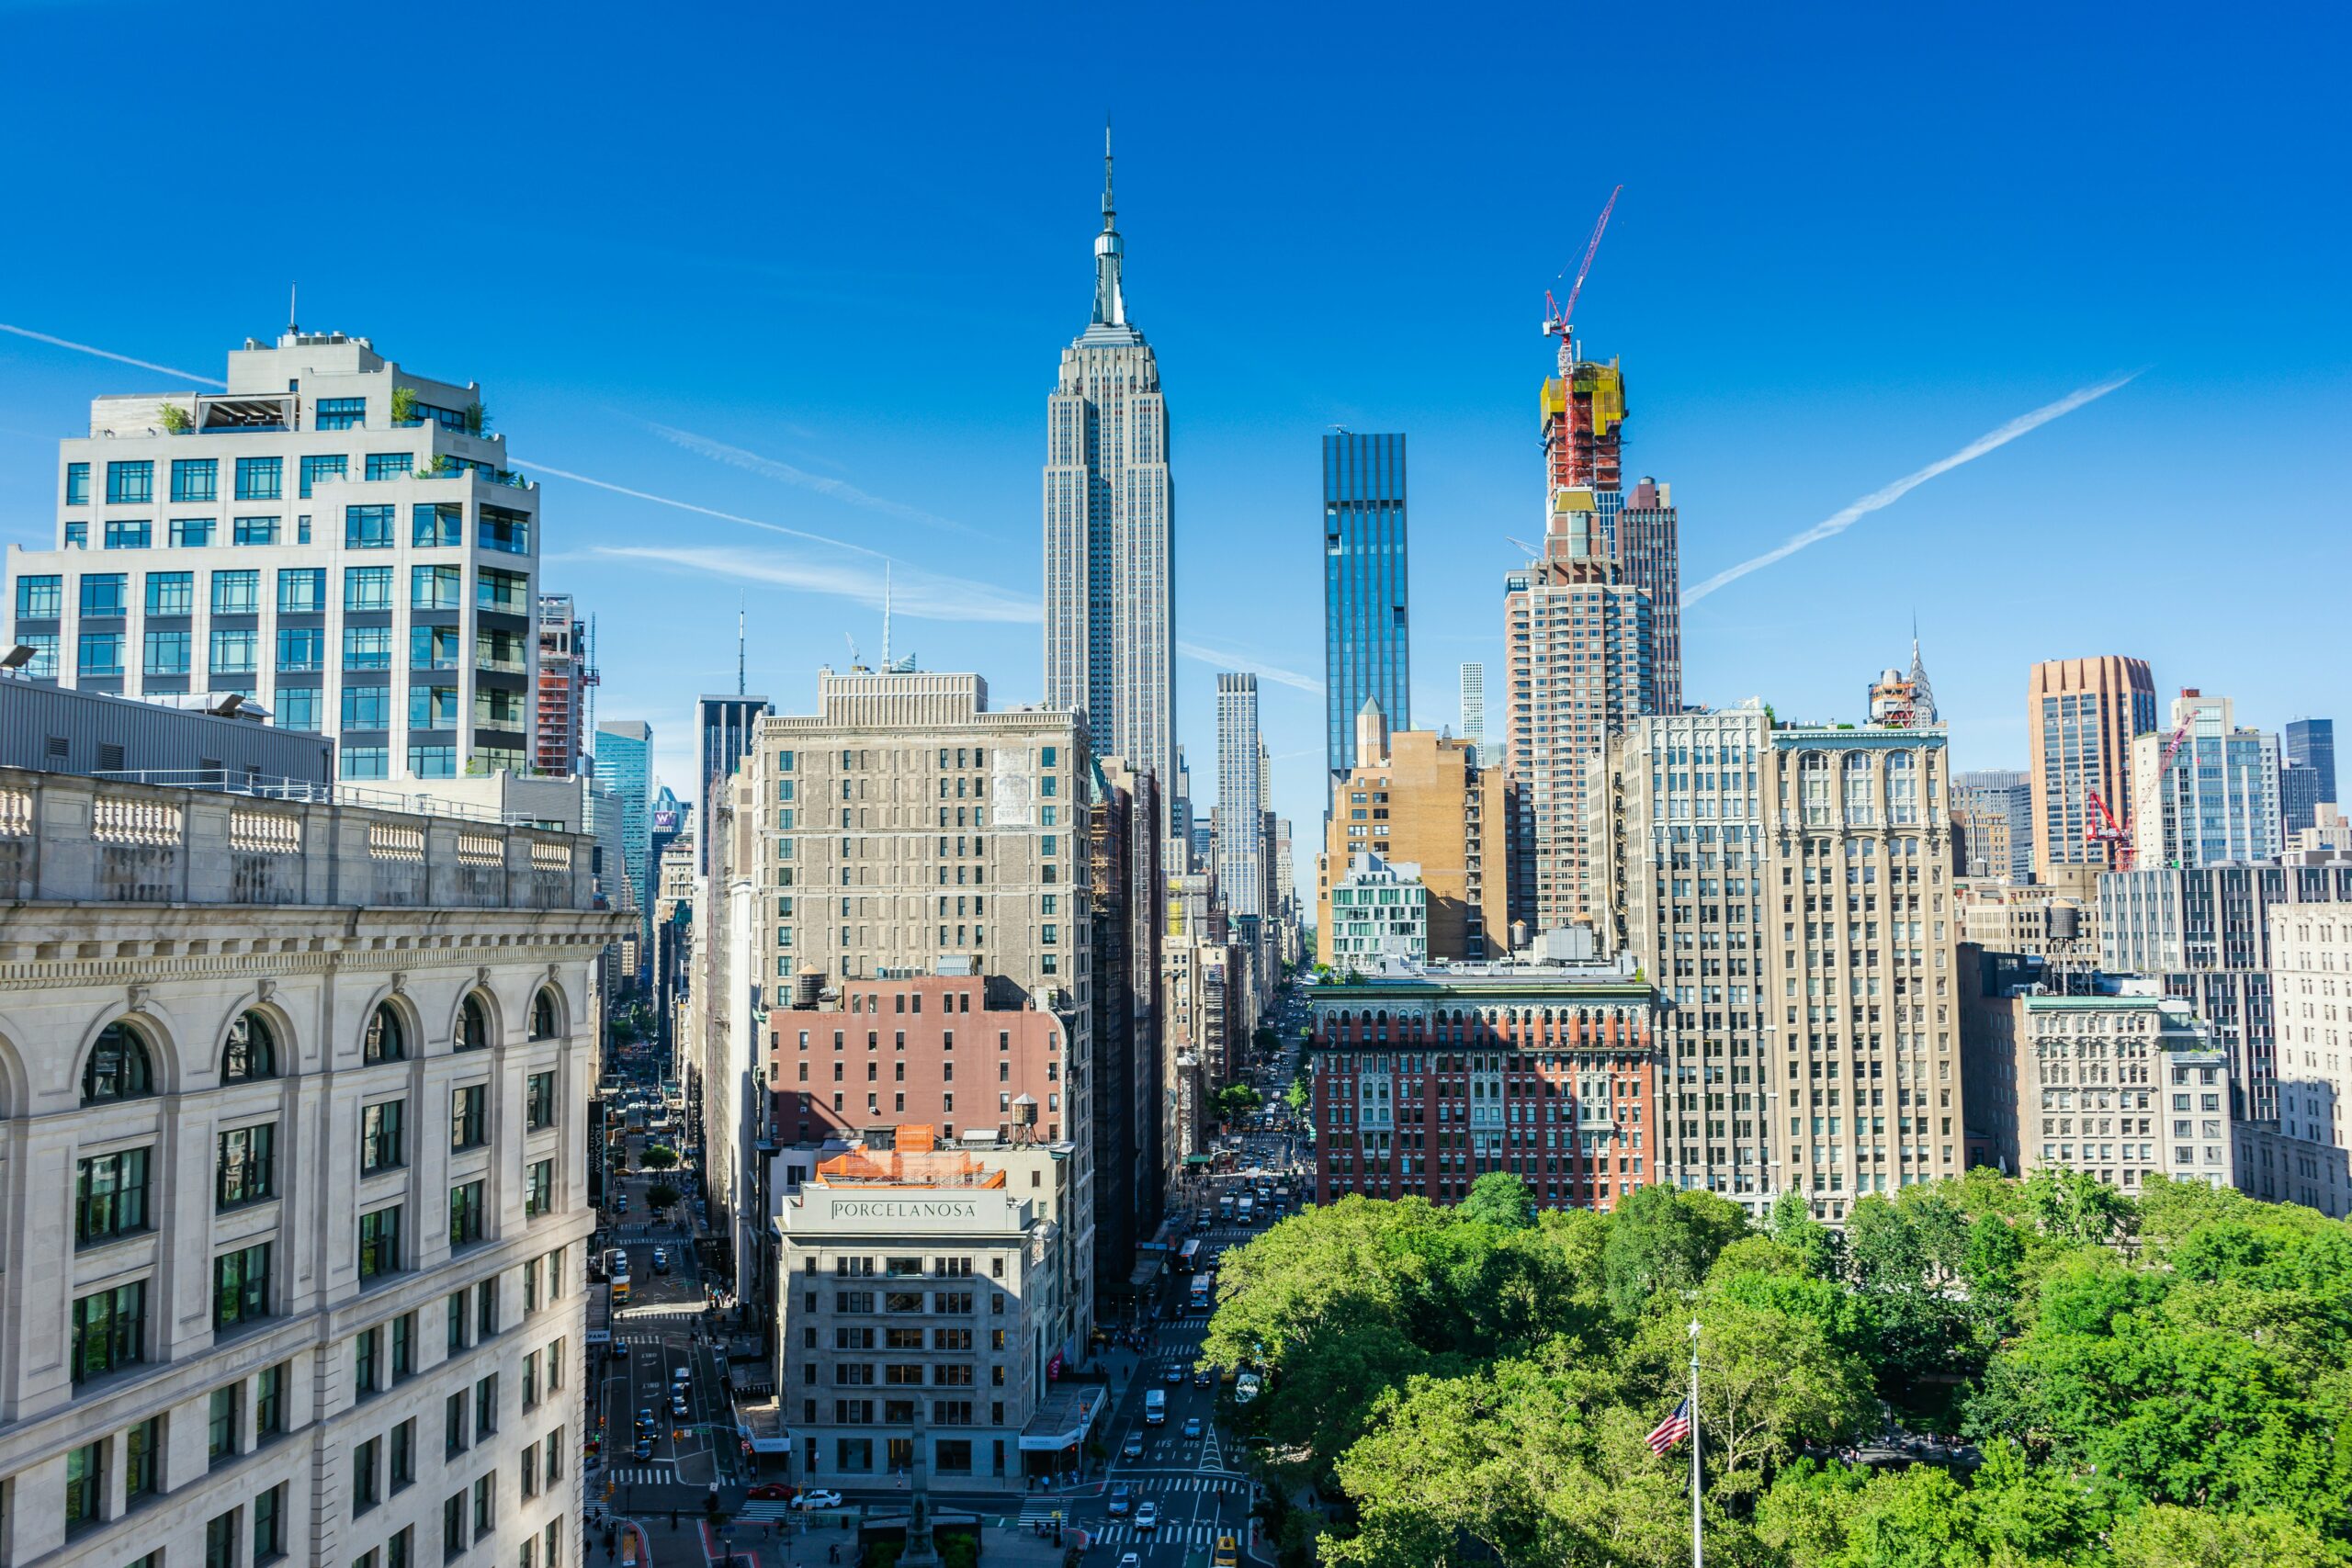 Forbes: “New York City Housing Shortage Highlights Need For More Development”